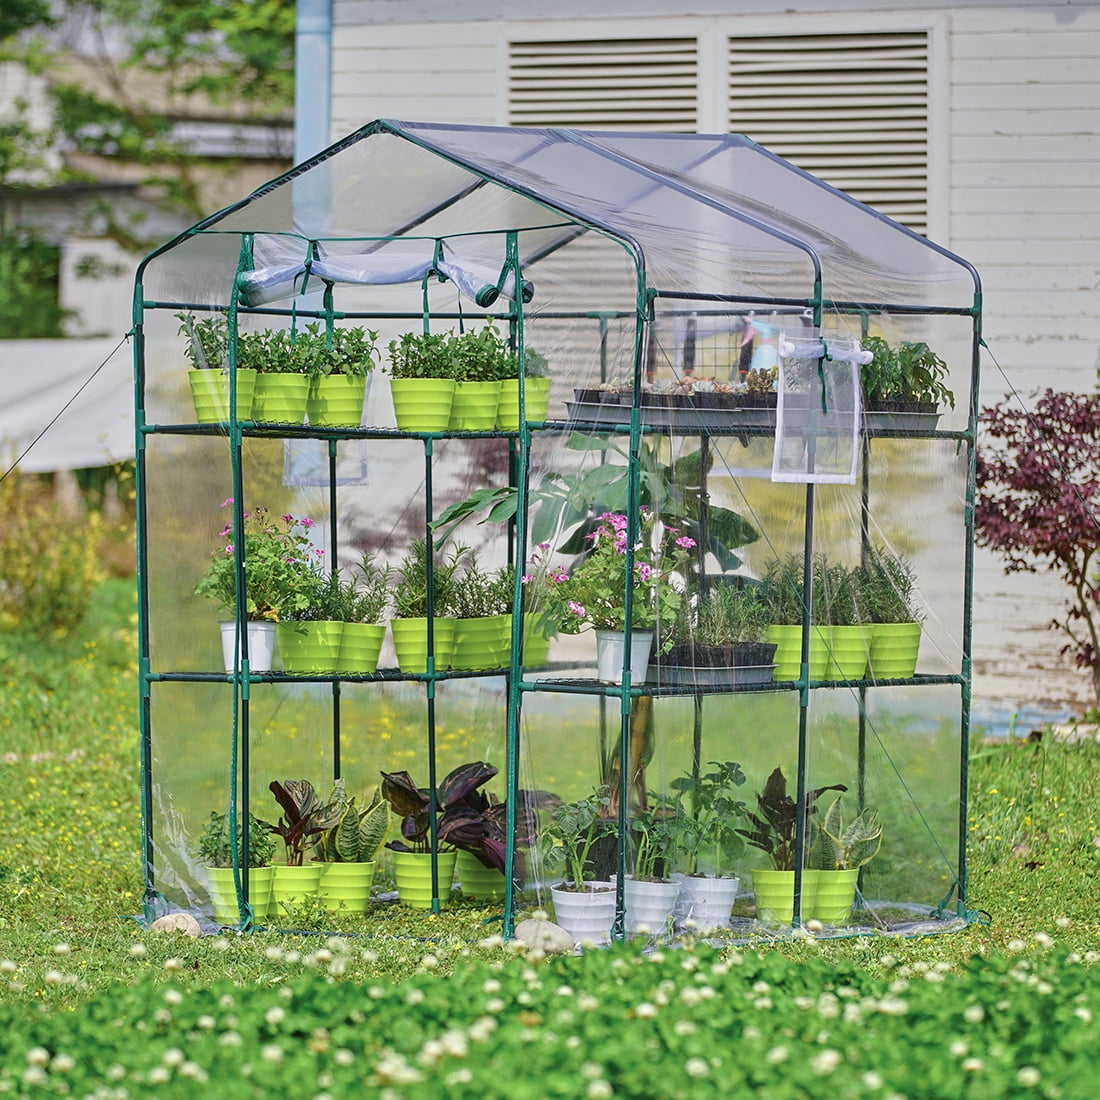 3 Tiers 6 Shelves 56x29x77 with 50 Plant Name Tags Quictent Greenhouse with Screen Door and Windows Walk-in Plant Garden Greenhouse for Indoor Outdoor 10 Stakes & 4 Ropes Green PE Cover 